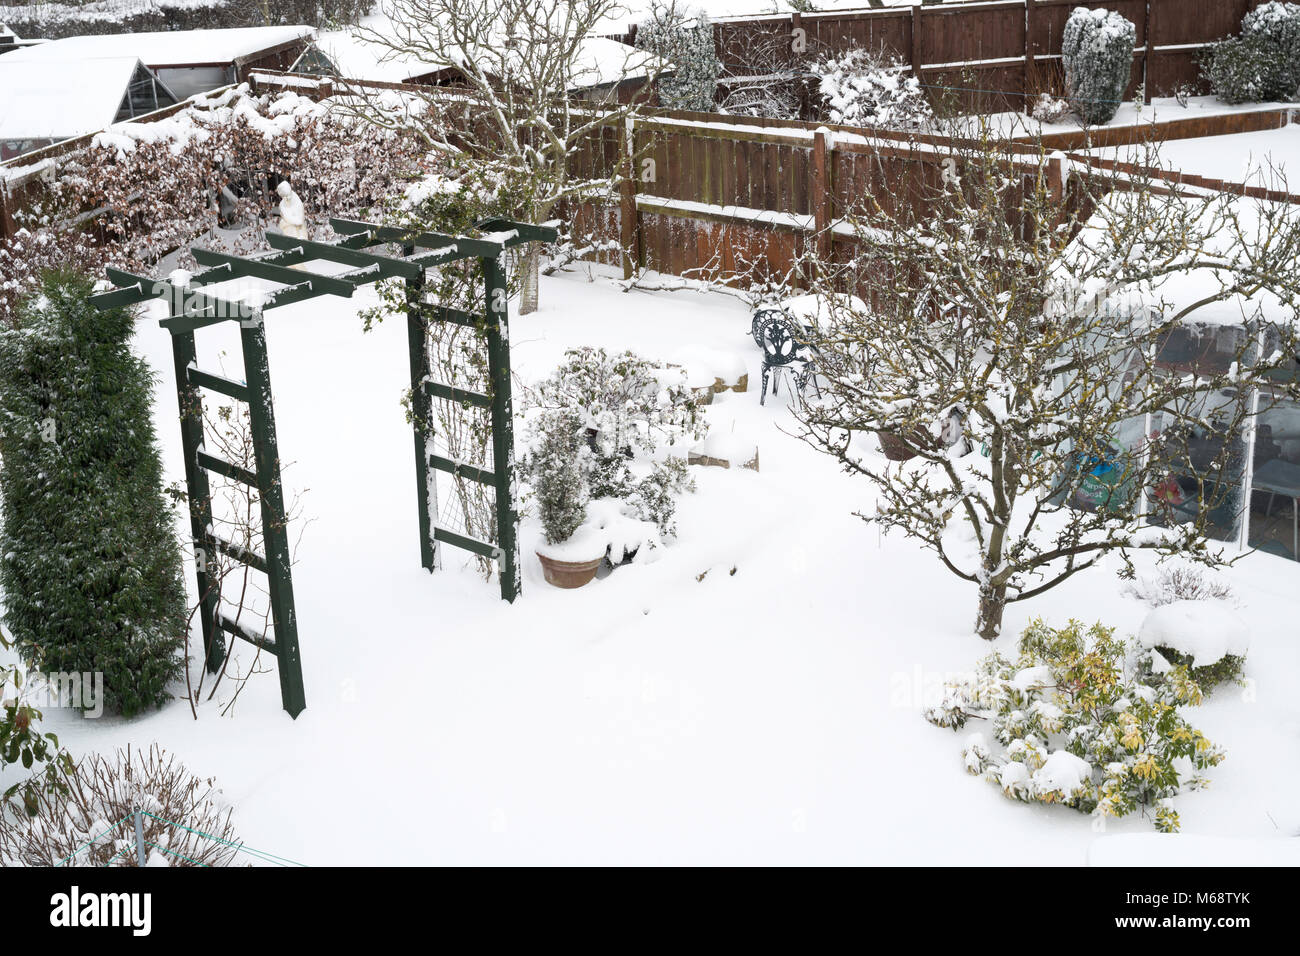 A snow covered suburban garden in winter, North East England, UK Stock Photo